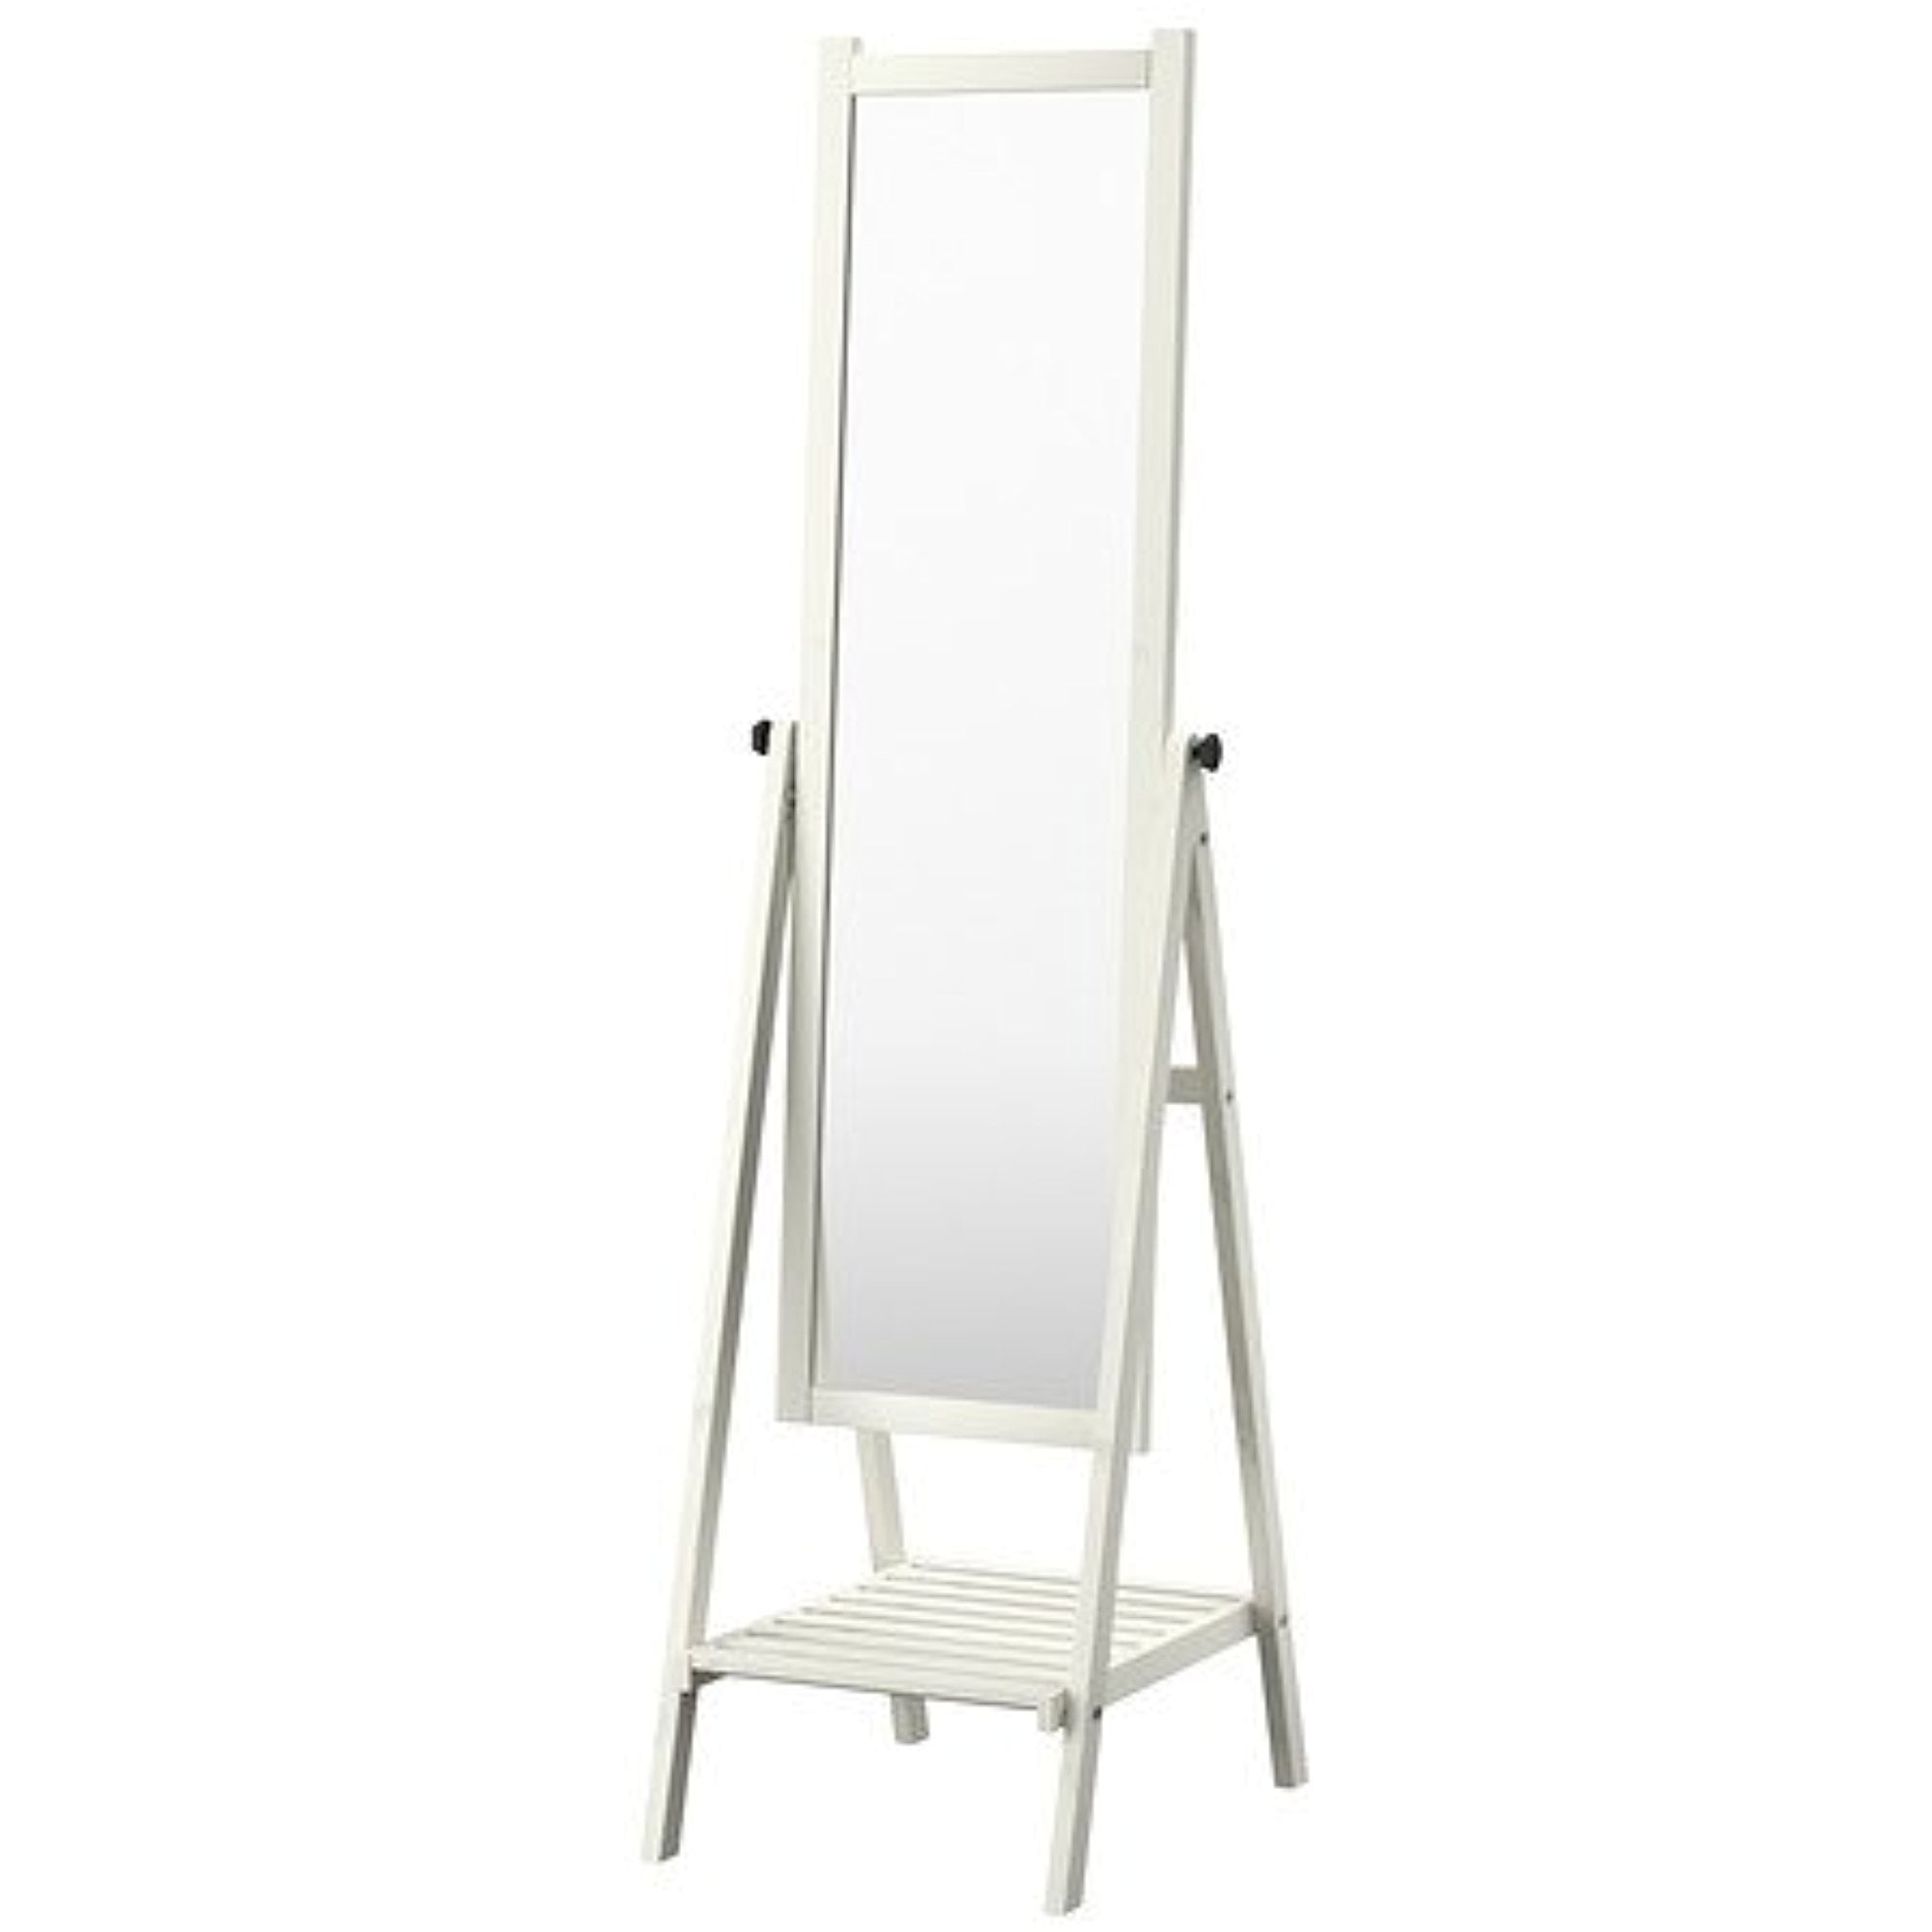 IKEA Floor Mirror: A Reflection Of Style And Functionality